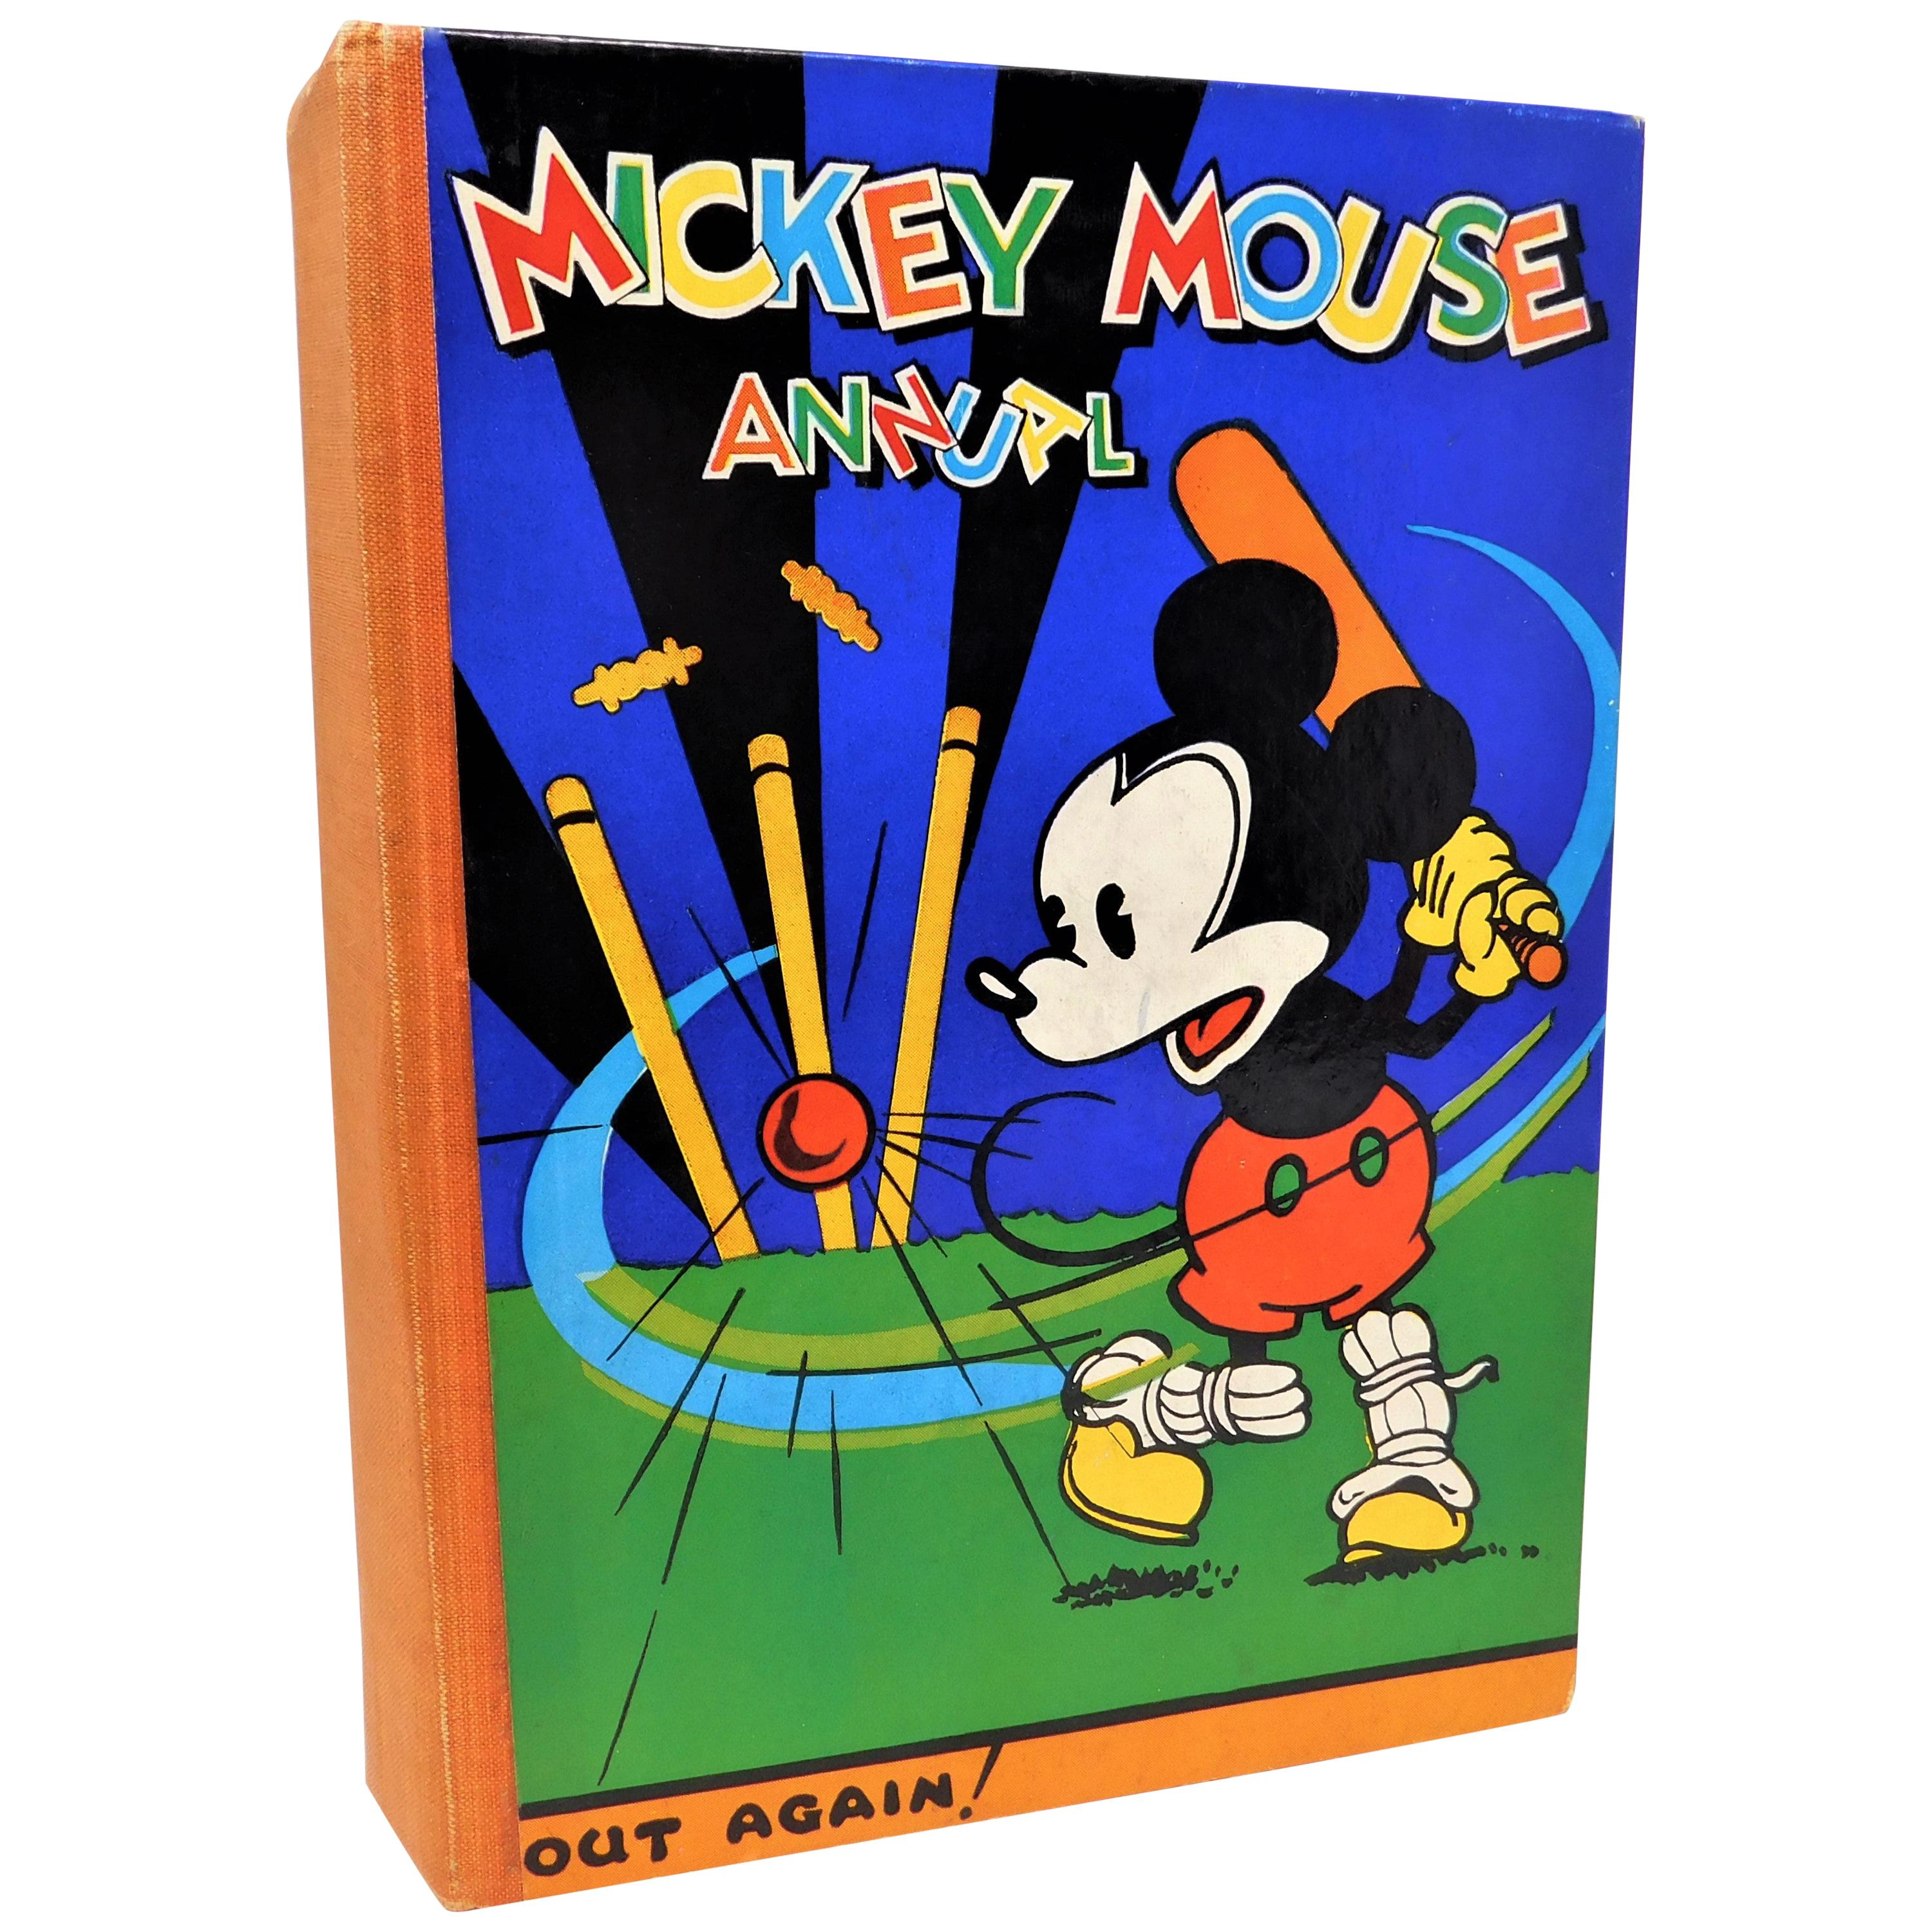 Rare Disney's Mickey Mouse Annual #4 1933 First Edition Book U.K. Pressing